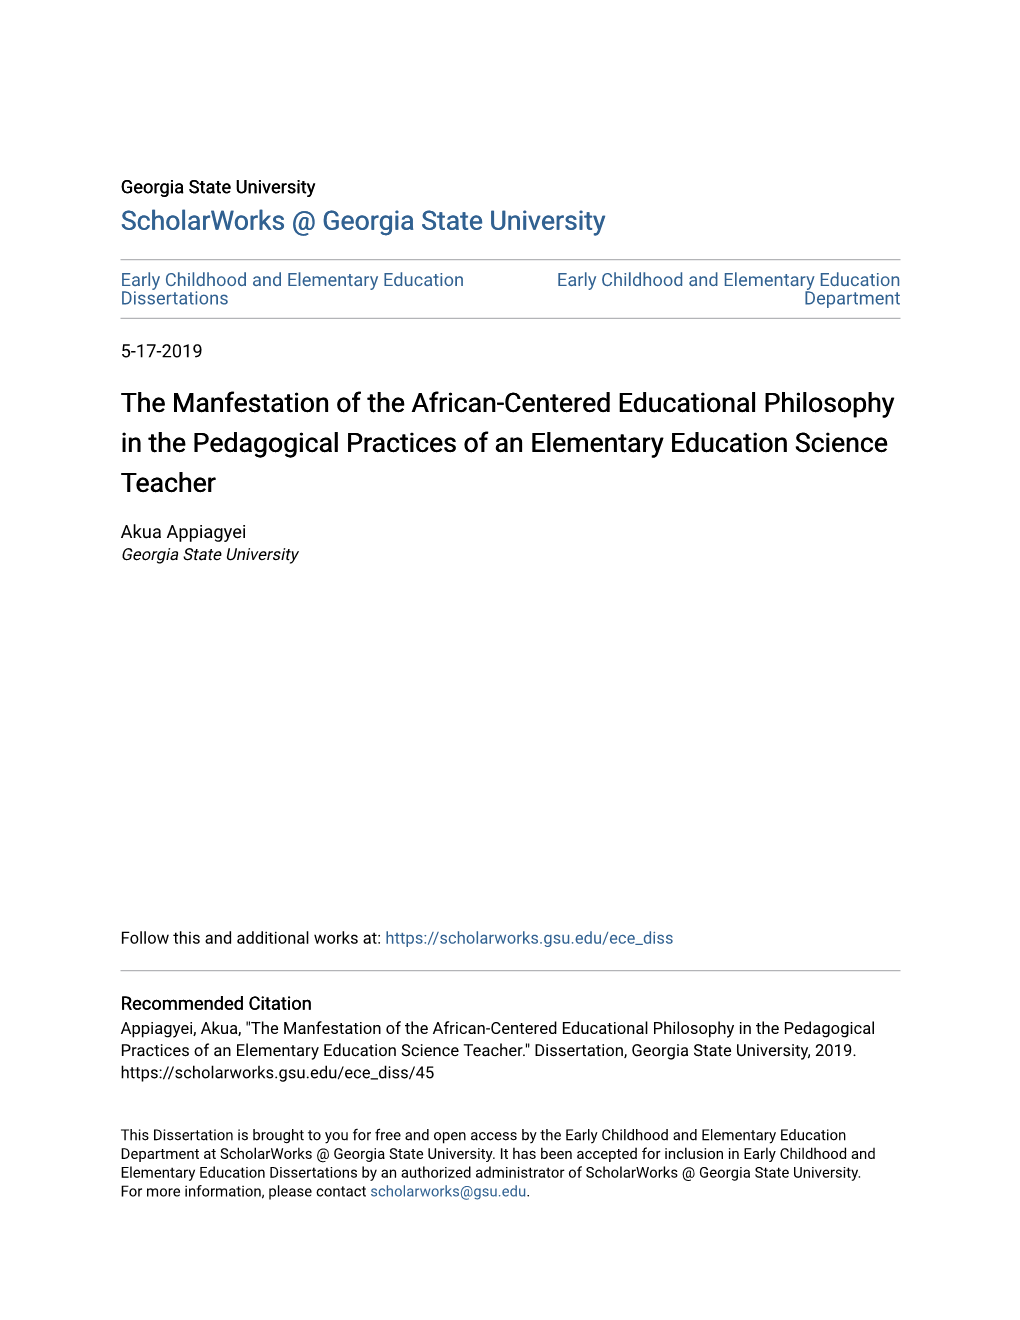 The Manfestation of the African-Centered Educational Philosophy in the Pedagogical Practices of an Elementary Education Science Teacher